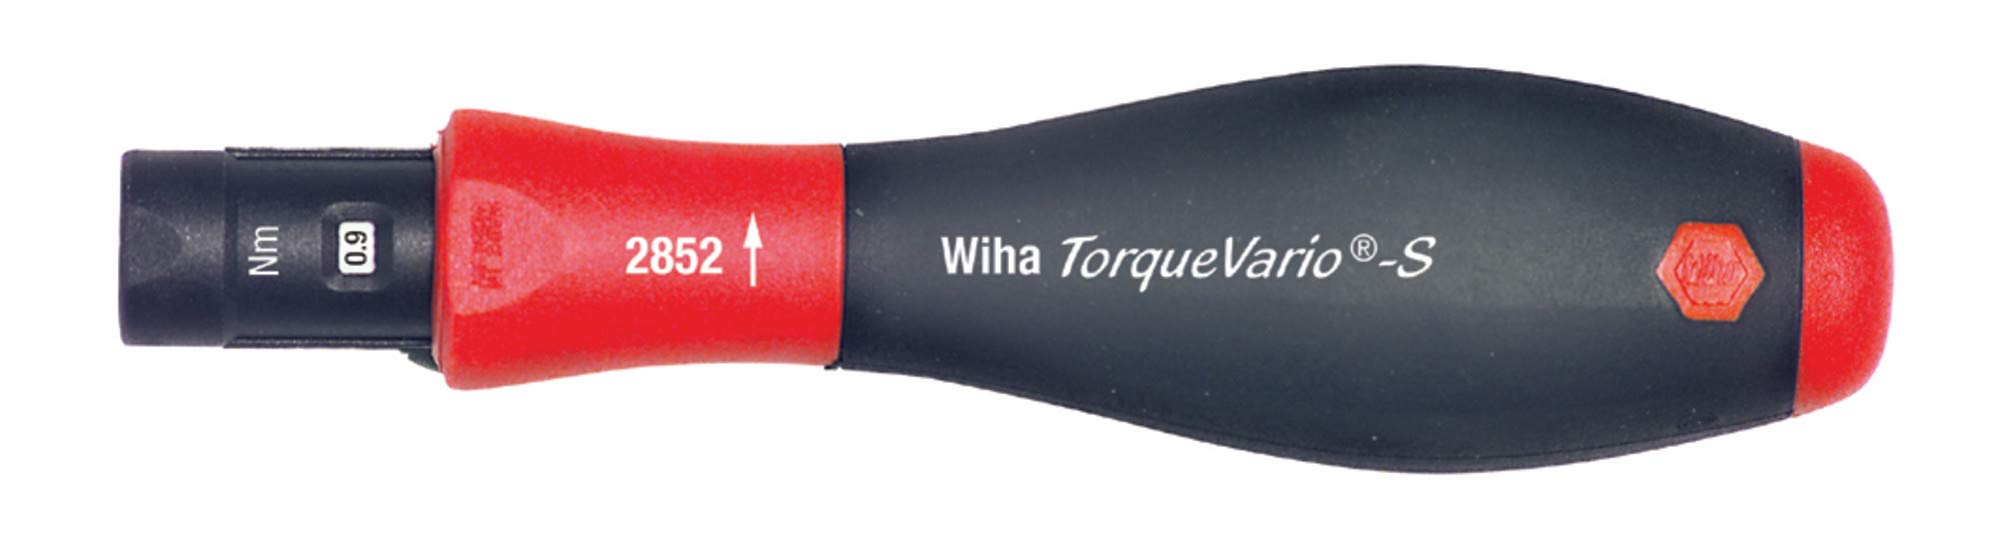 Adjustable TorqueVario Handle with Direct Reading Scale